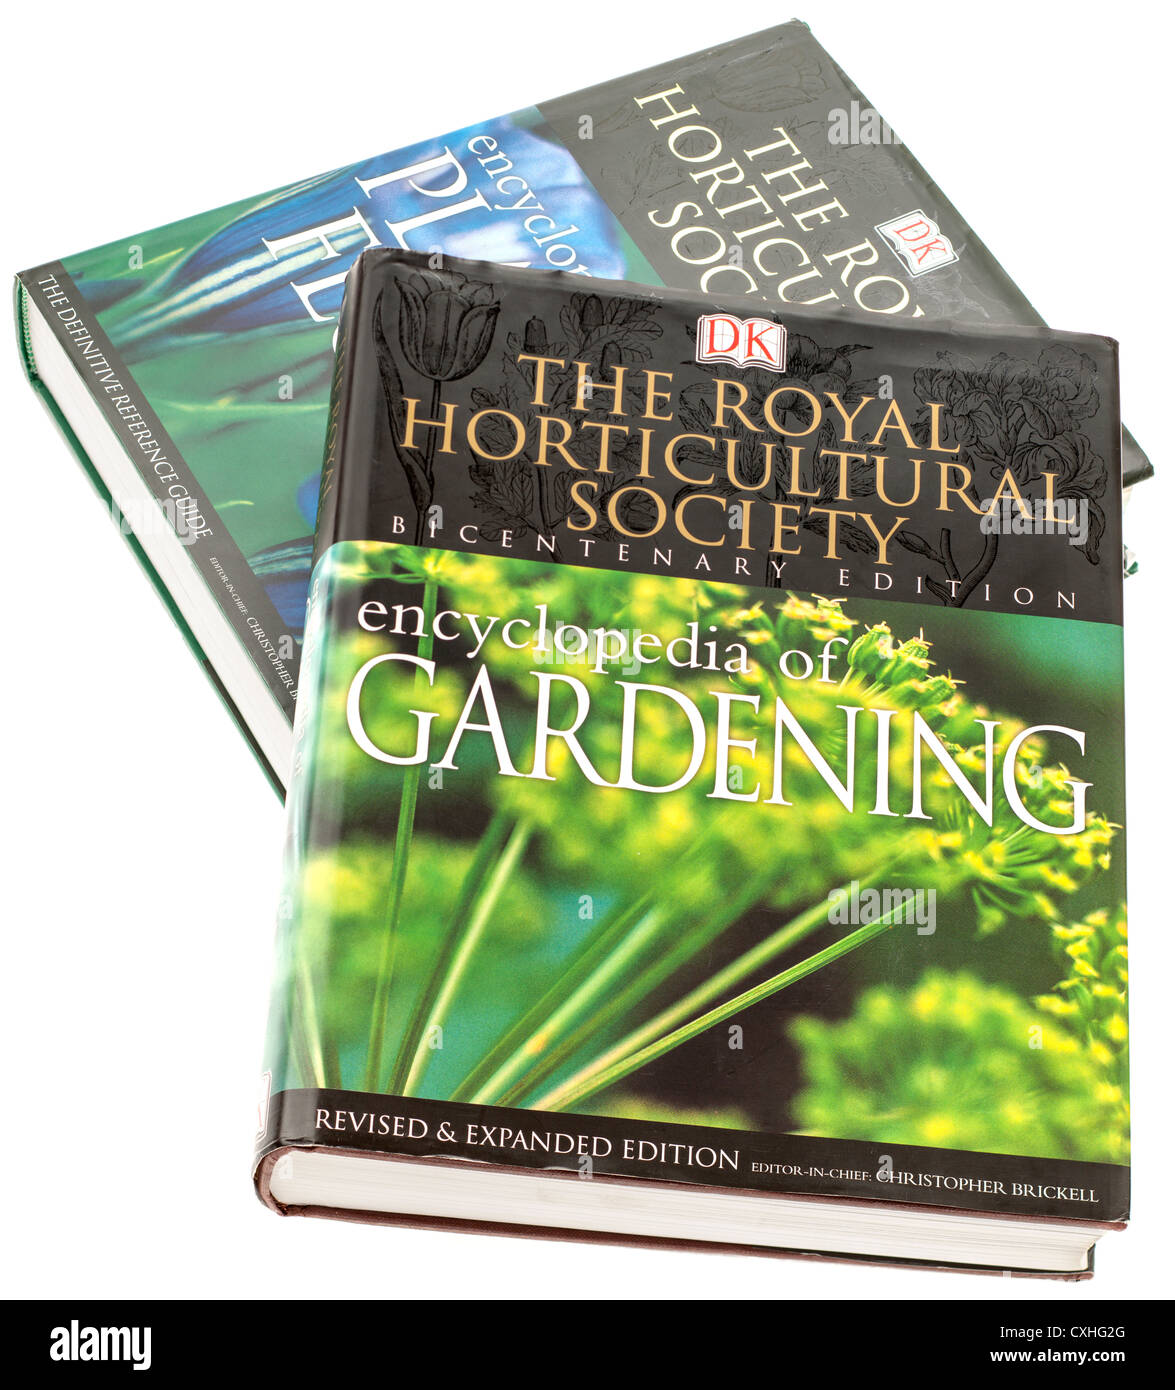 Royal Horticultural Society encyclopedia of gardening book and  Royal Horticultural Society encyclopedia of plants and flowers Stock Photo